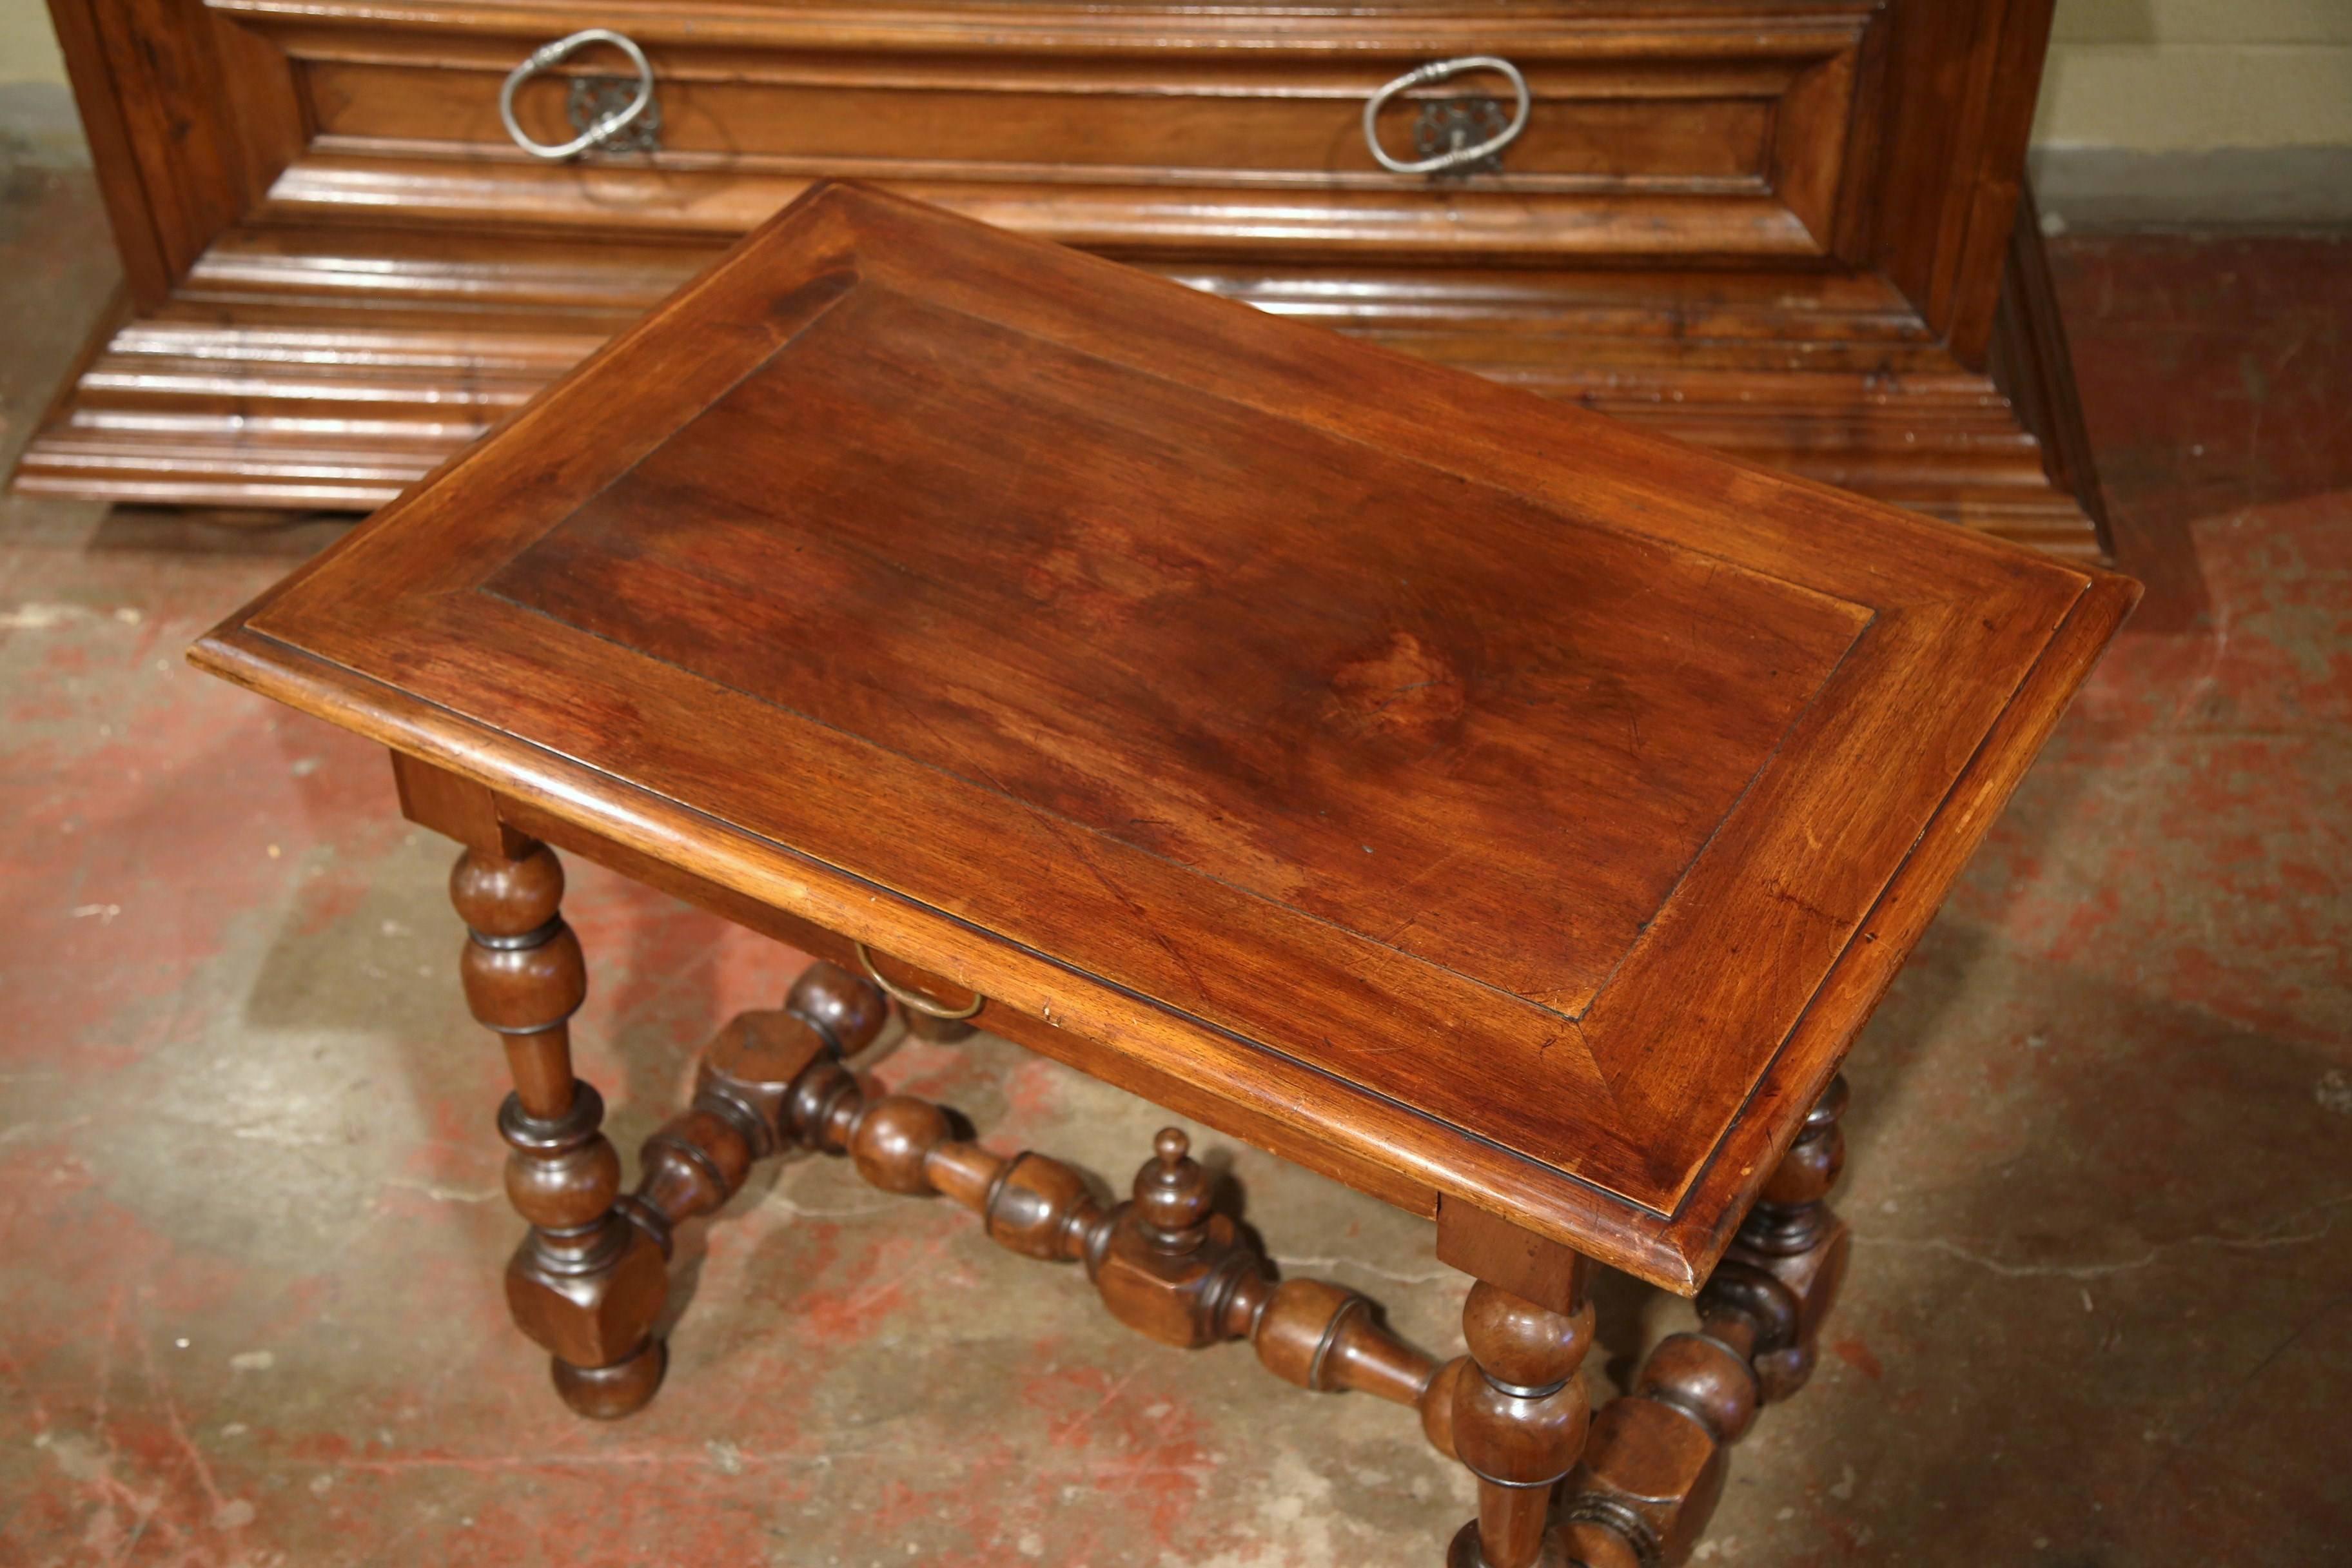 Incorporate extra, functional surface space into your living room with this elegant fruitwood end table. Crafted in the Perigord region of France, circa 1840, this table desk features a large single drawer across the front with brass handle. The